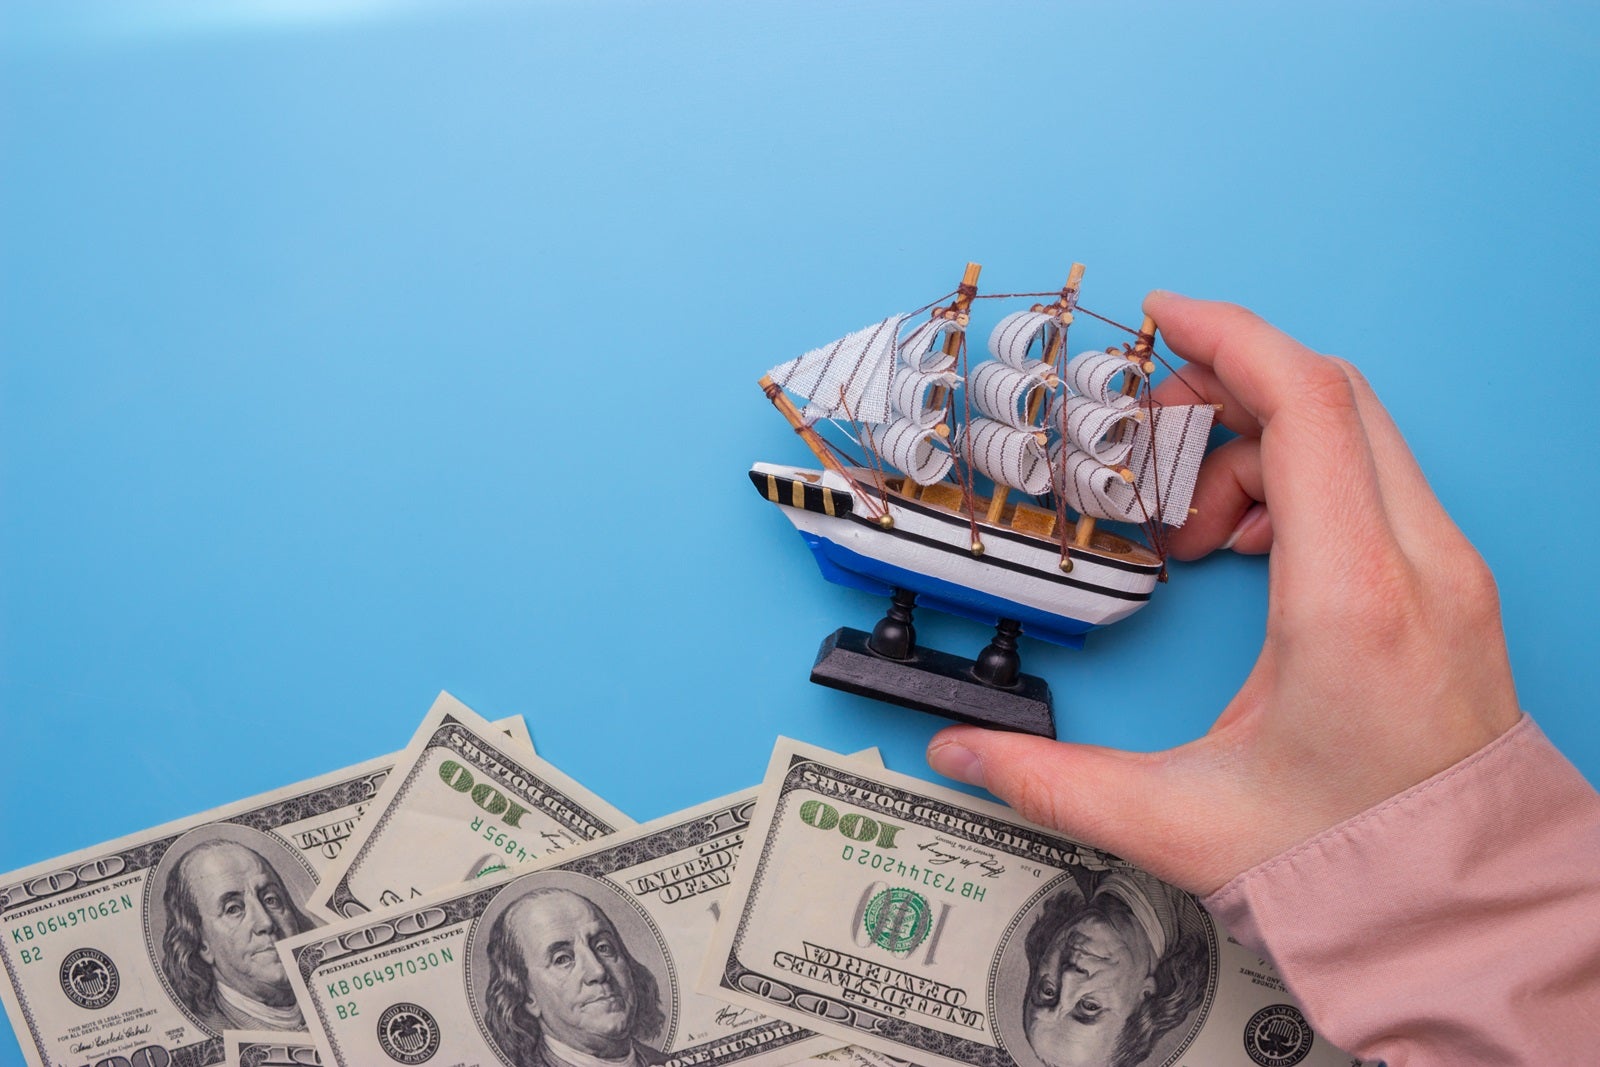 Flat-lay photo of a hand holding a toy sailing ship above a sea of US $100 bills